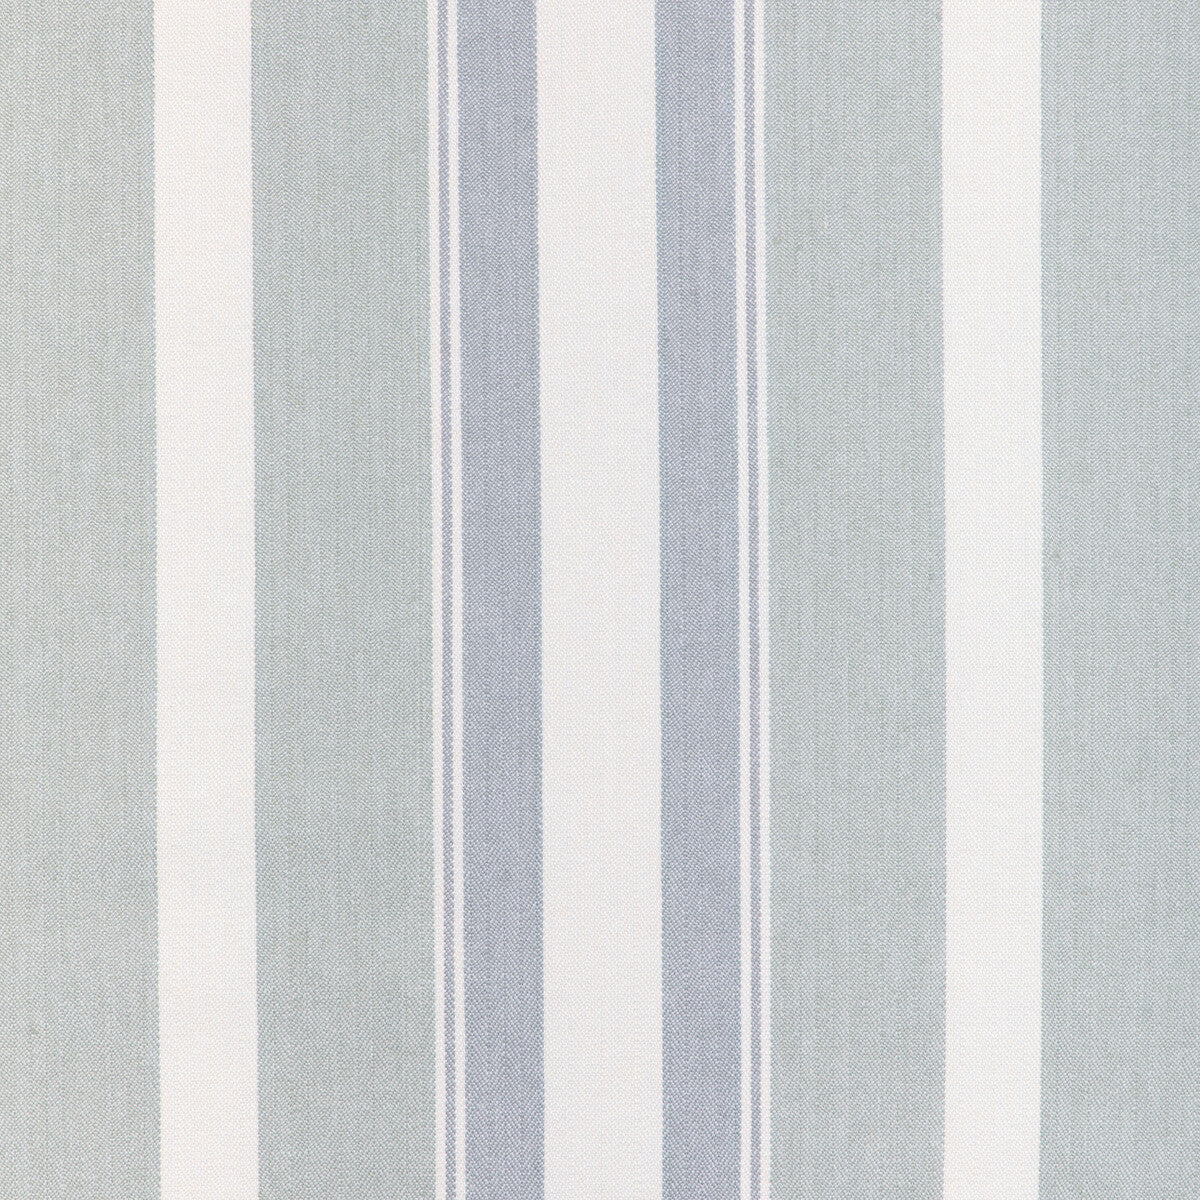 Natural Stripe fabric in seaglass color - pattern 36863.15.0 - by Kravet Couture in the Atelier Weaves collection